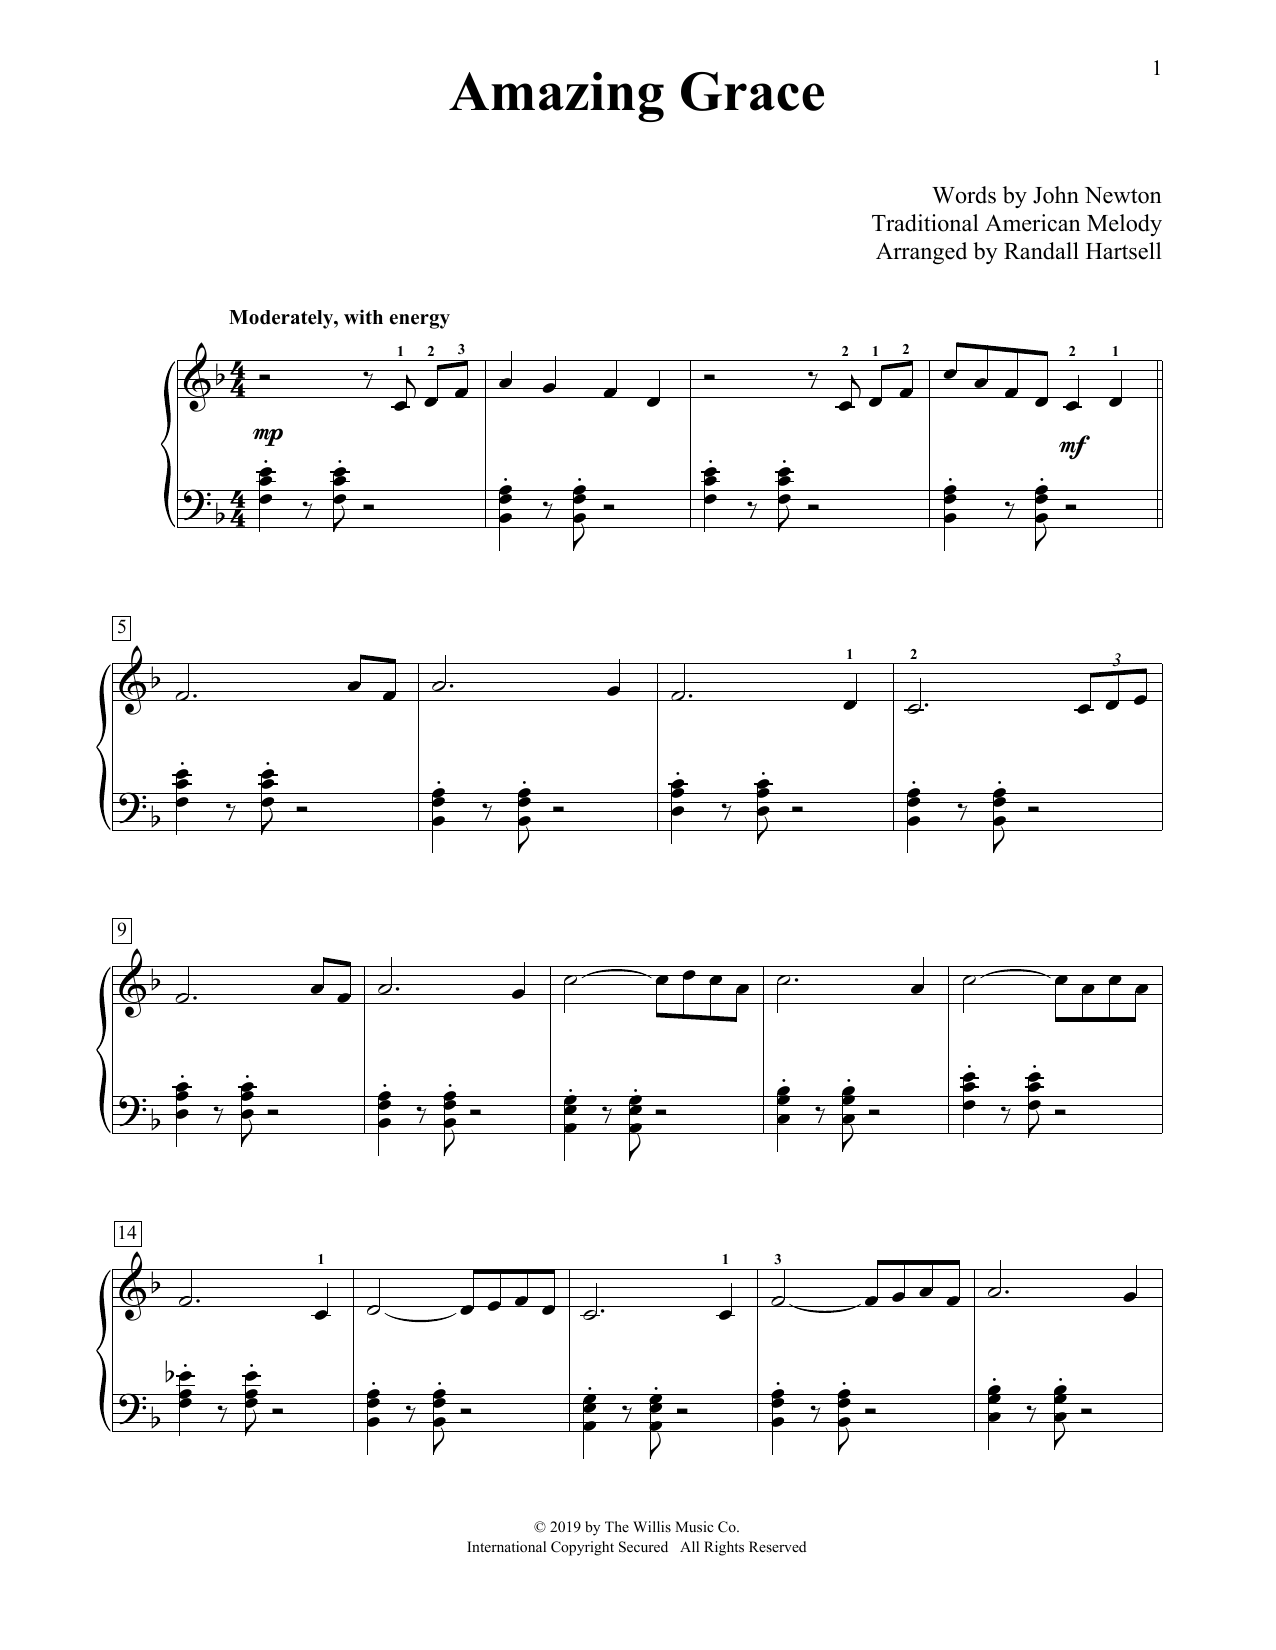 Download Traditional American Melody Amazing Grace (arr. Randall Hartsell) Sheet Music